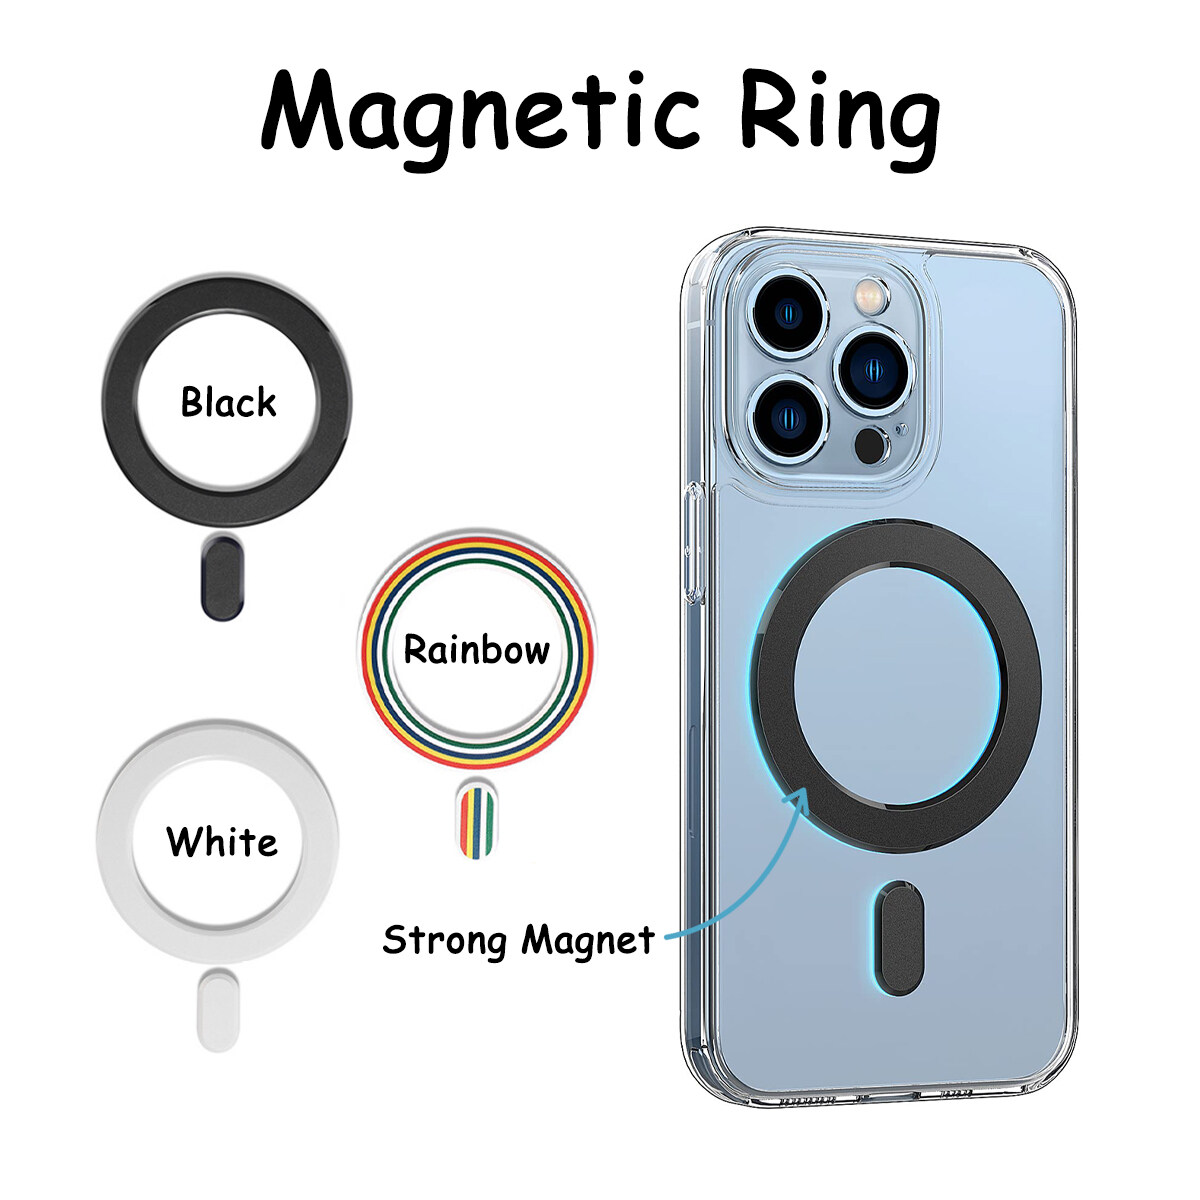 Magnetic Ring Sticker Price & Promotion-Dec 2023